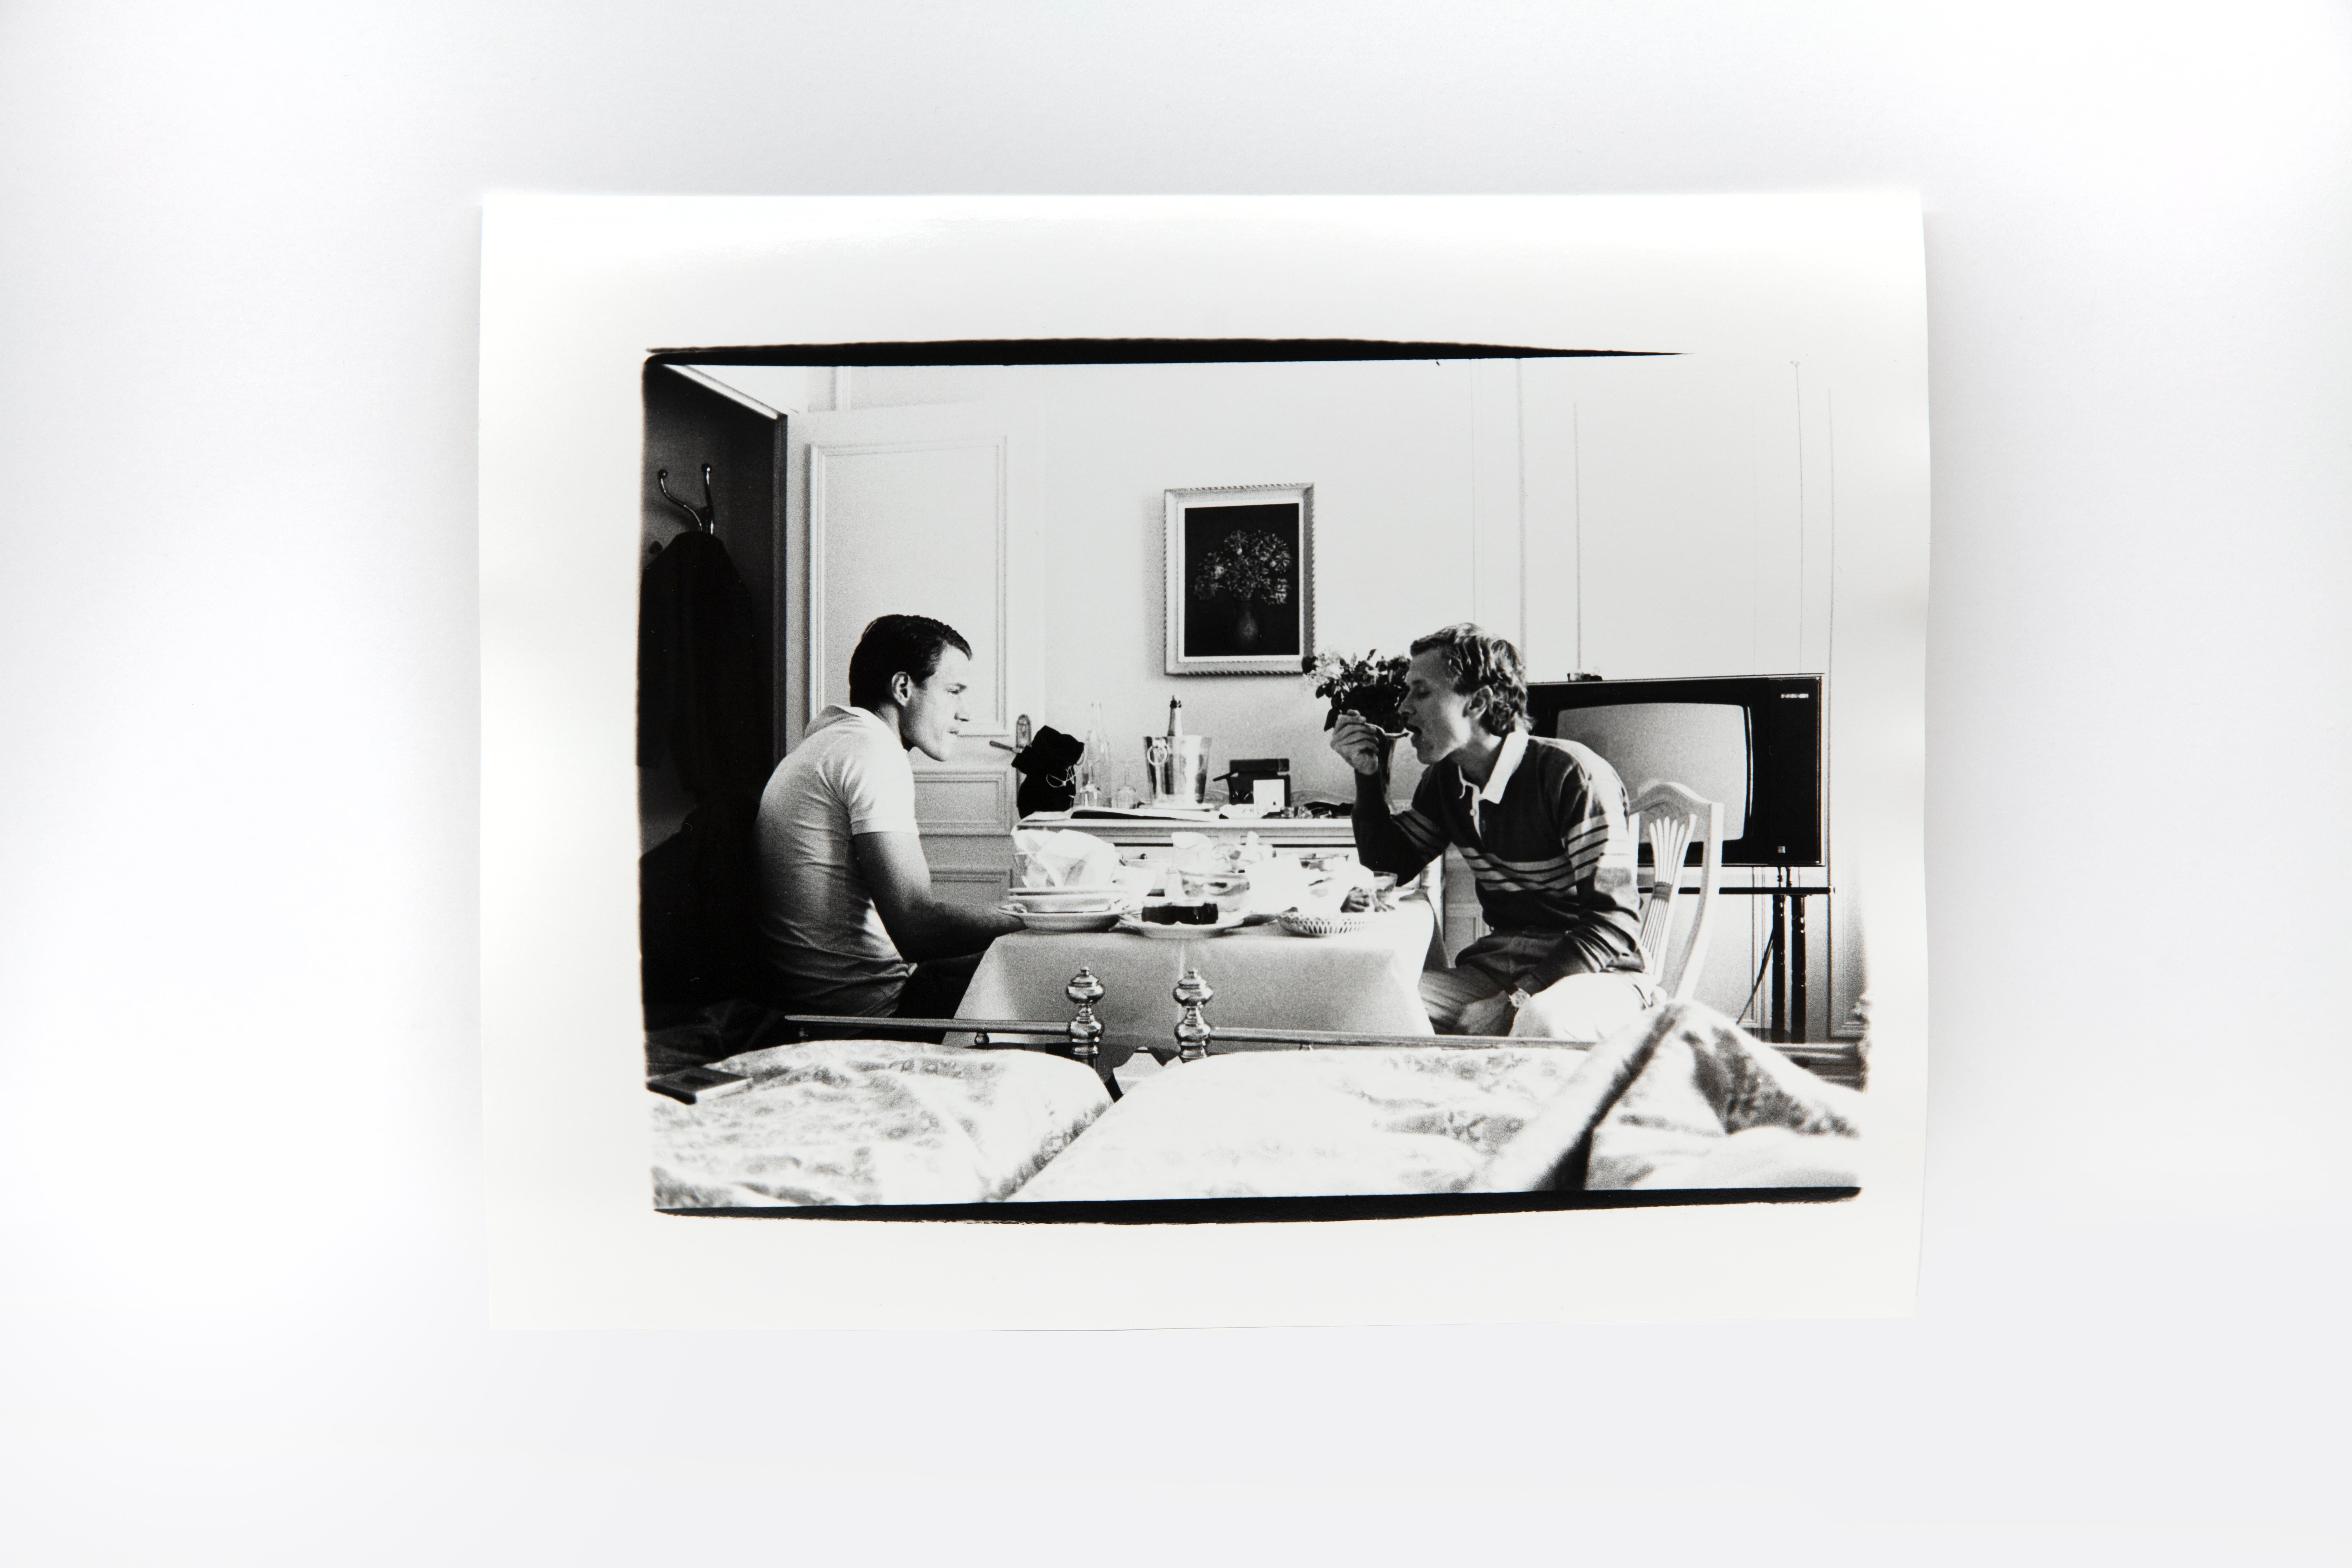 Andy Warhol Portrait Photograph - Jed Johnson and Thomas Ammann in Hotel Room, Monte Carlo